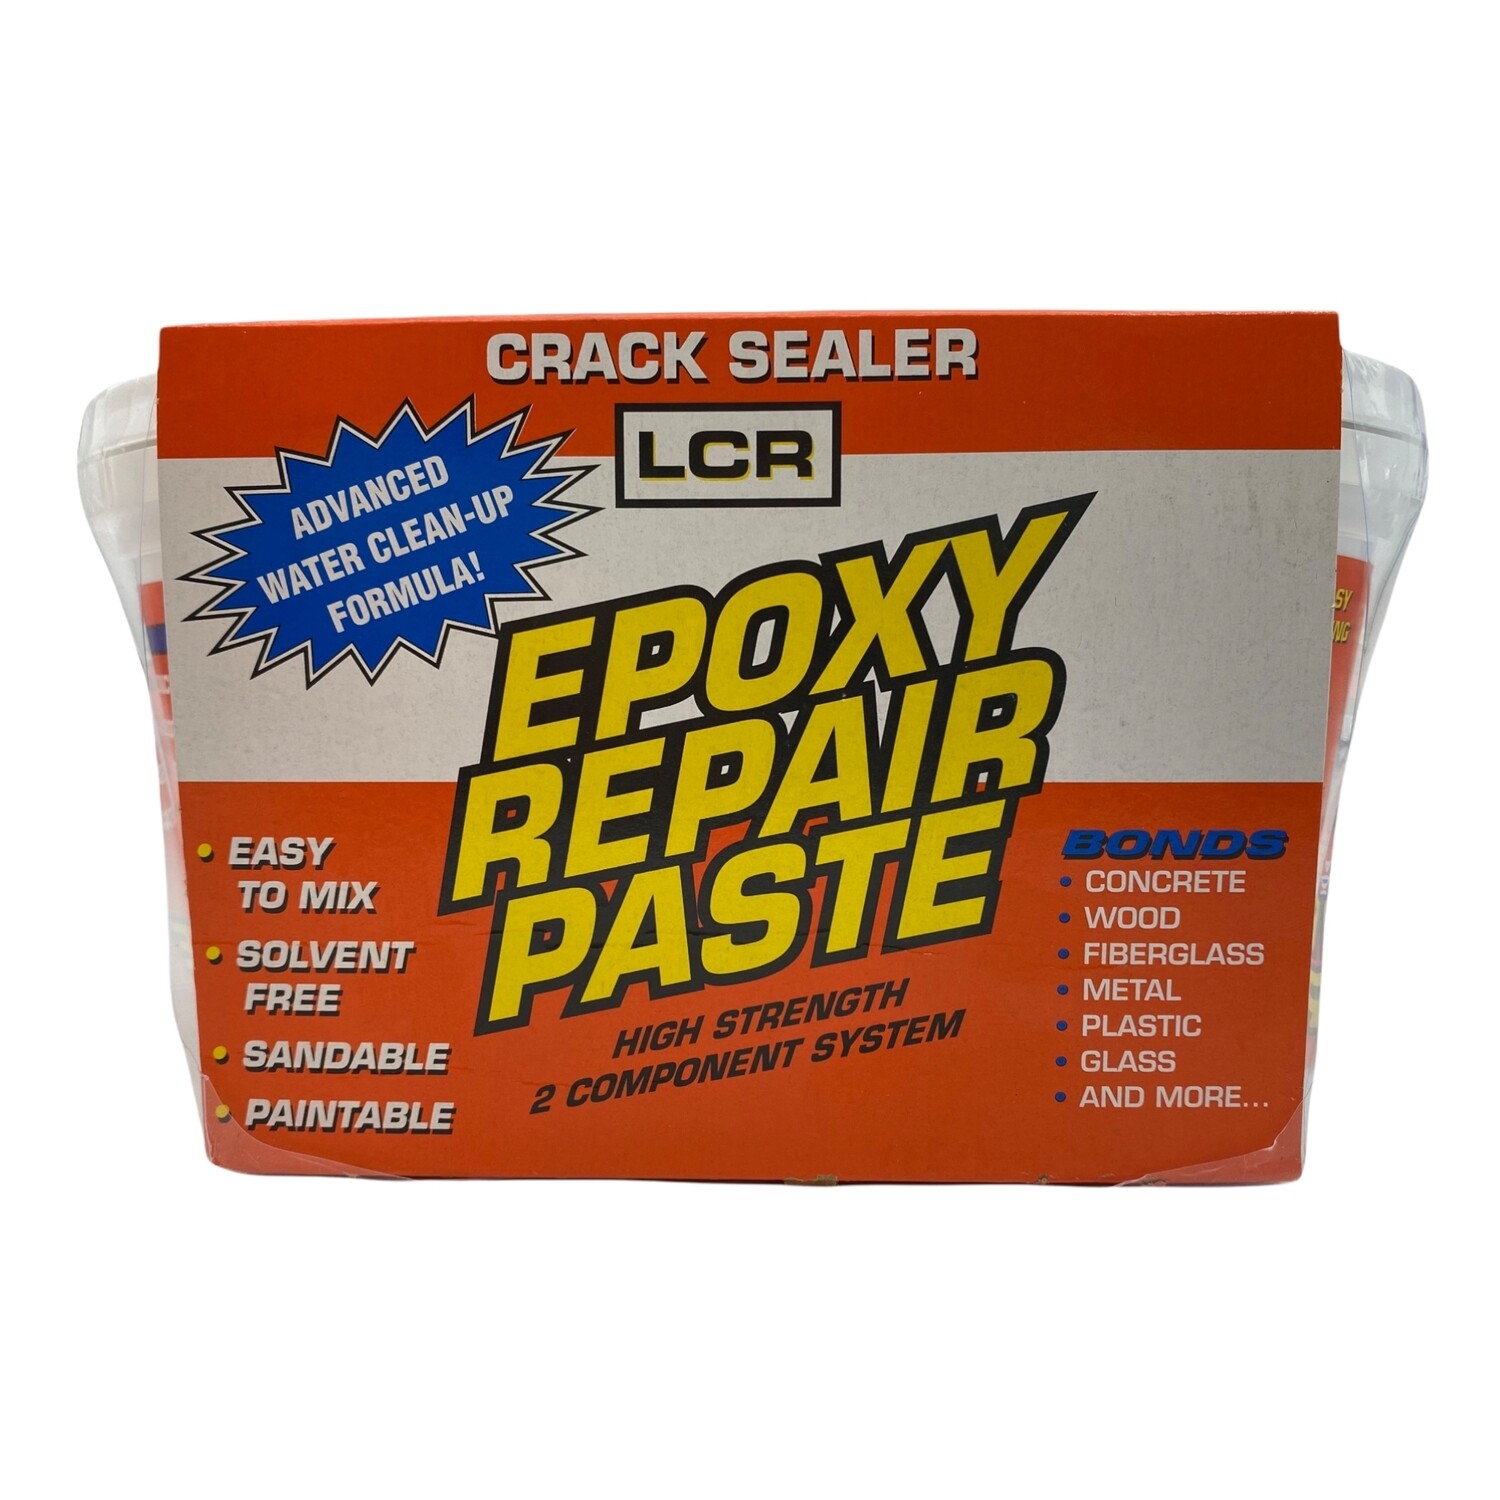 LCR Epoxy Repair Paste Crack Sealer for Concrete Wall Leak Repair High Strength 2 Component System Works on Concrete, Wood, Fiberglass, Metal, Plastic, Glass, and More